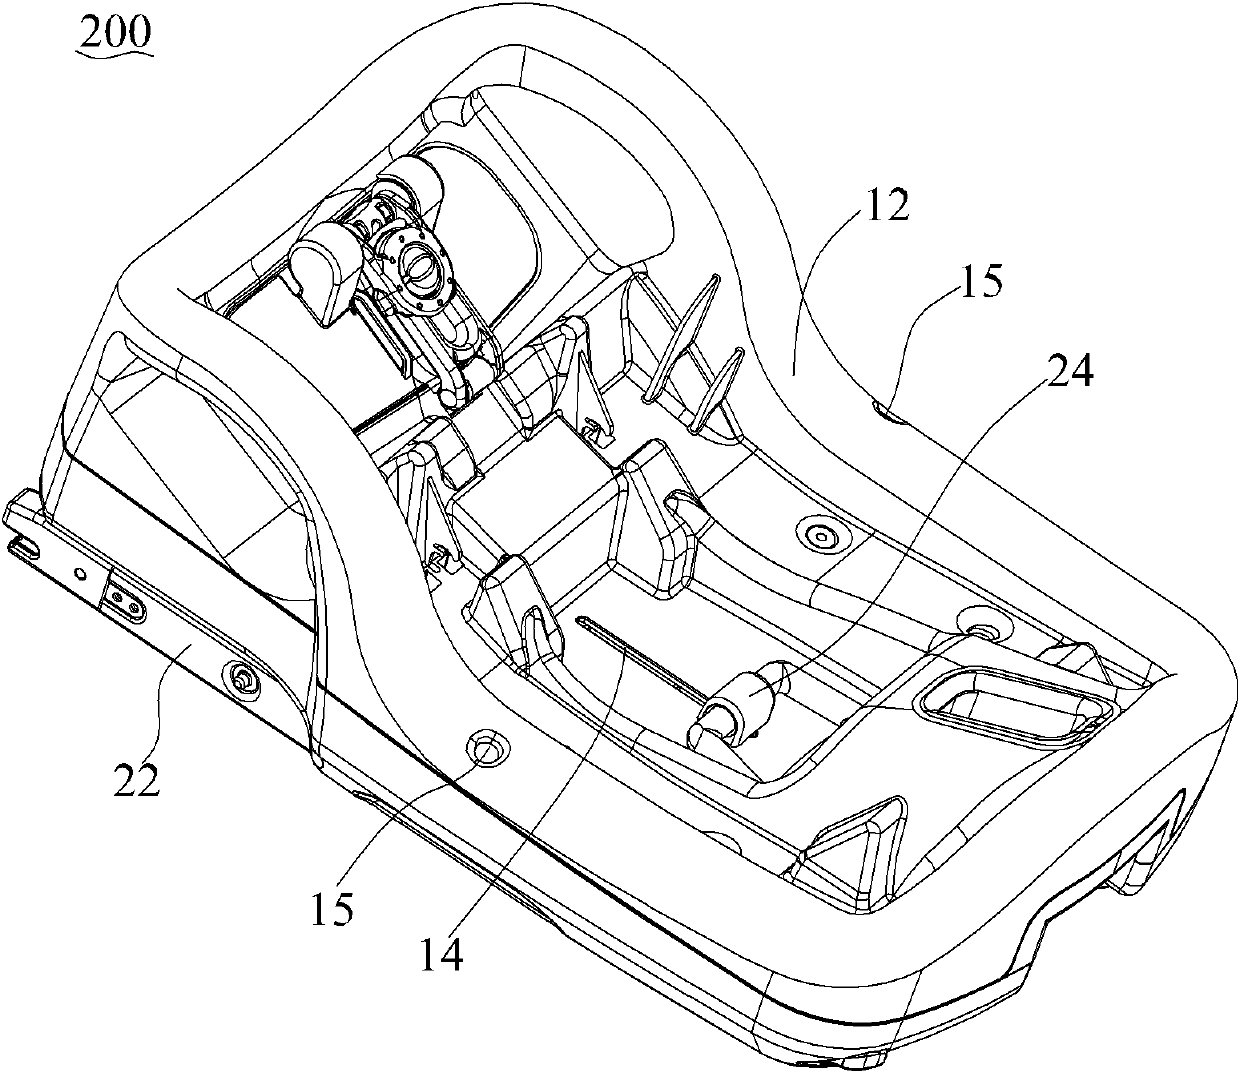 Telescopic-type connection device and child car seat